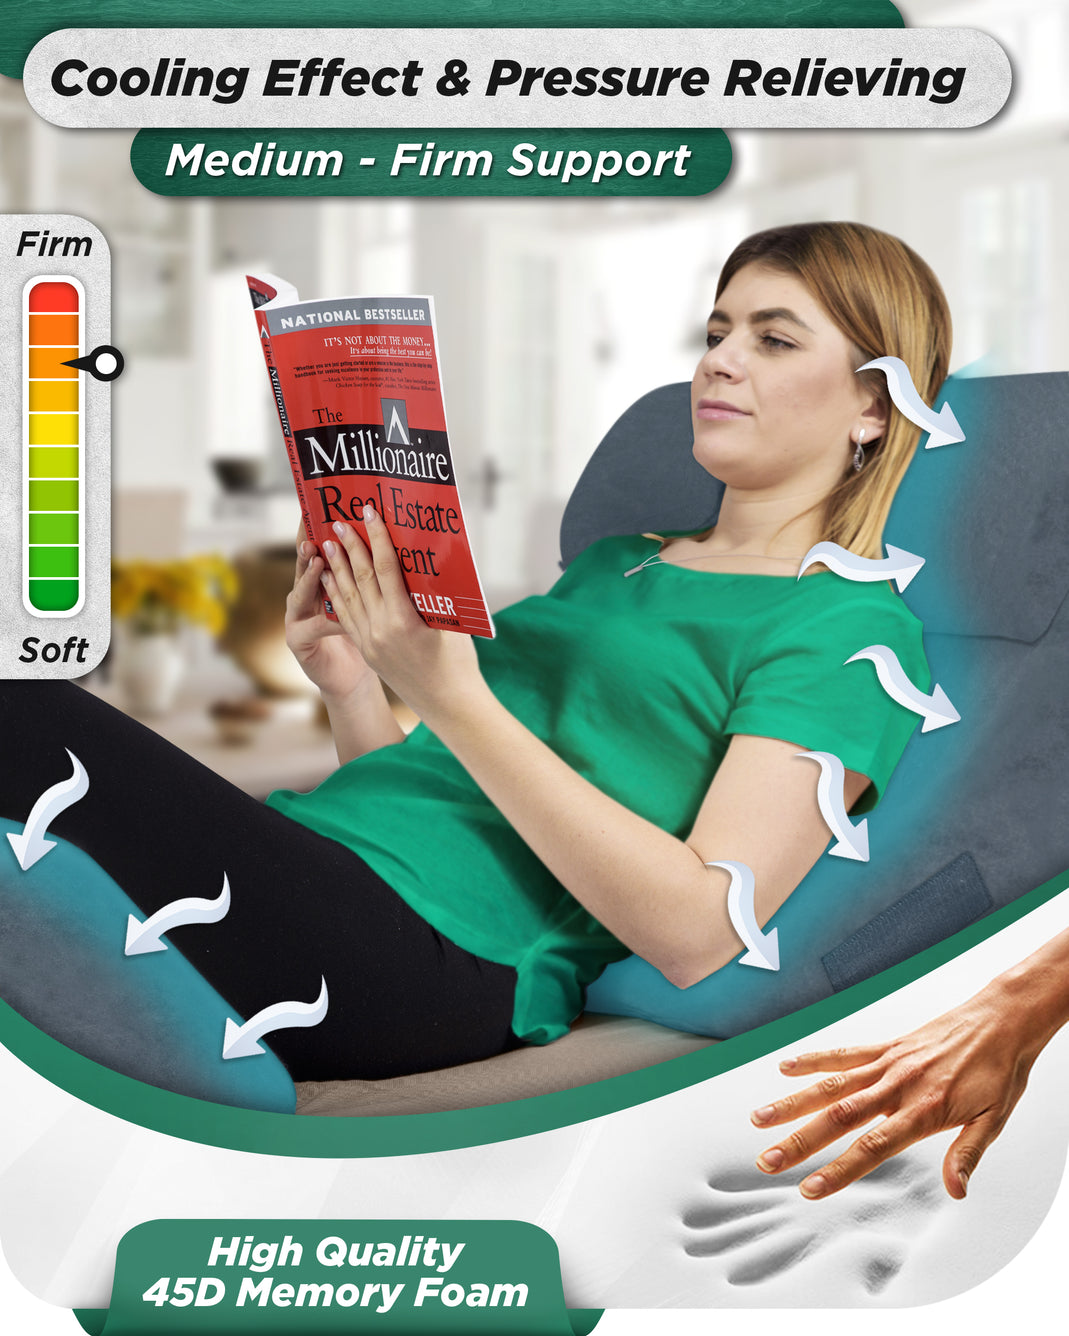 Lunix 4pcs Orthopedic Bed Wedge Pillow Set, Post Surgery Memory Foam for Back, Neck, Leg and Knee Pain Relief. Sitting Pillow, Comfortable and Adjusta